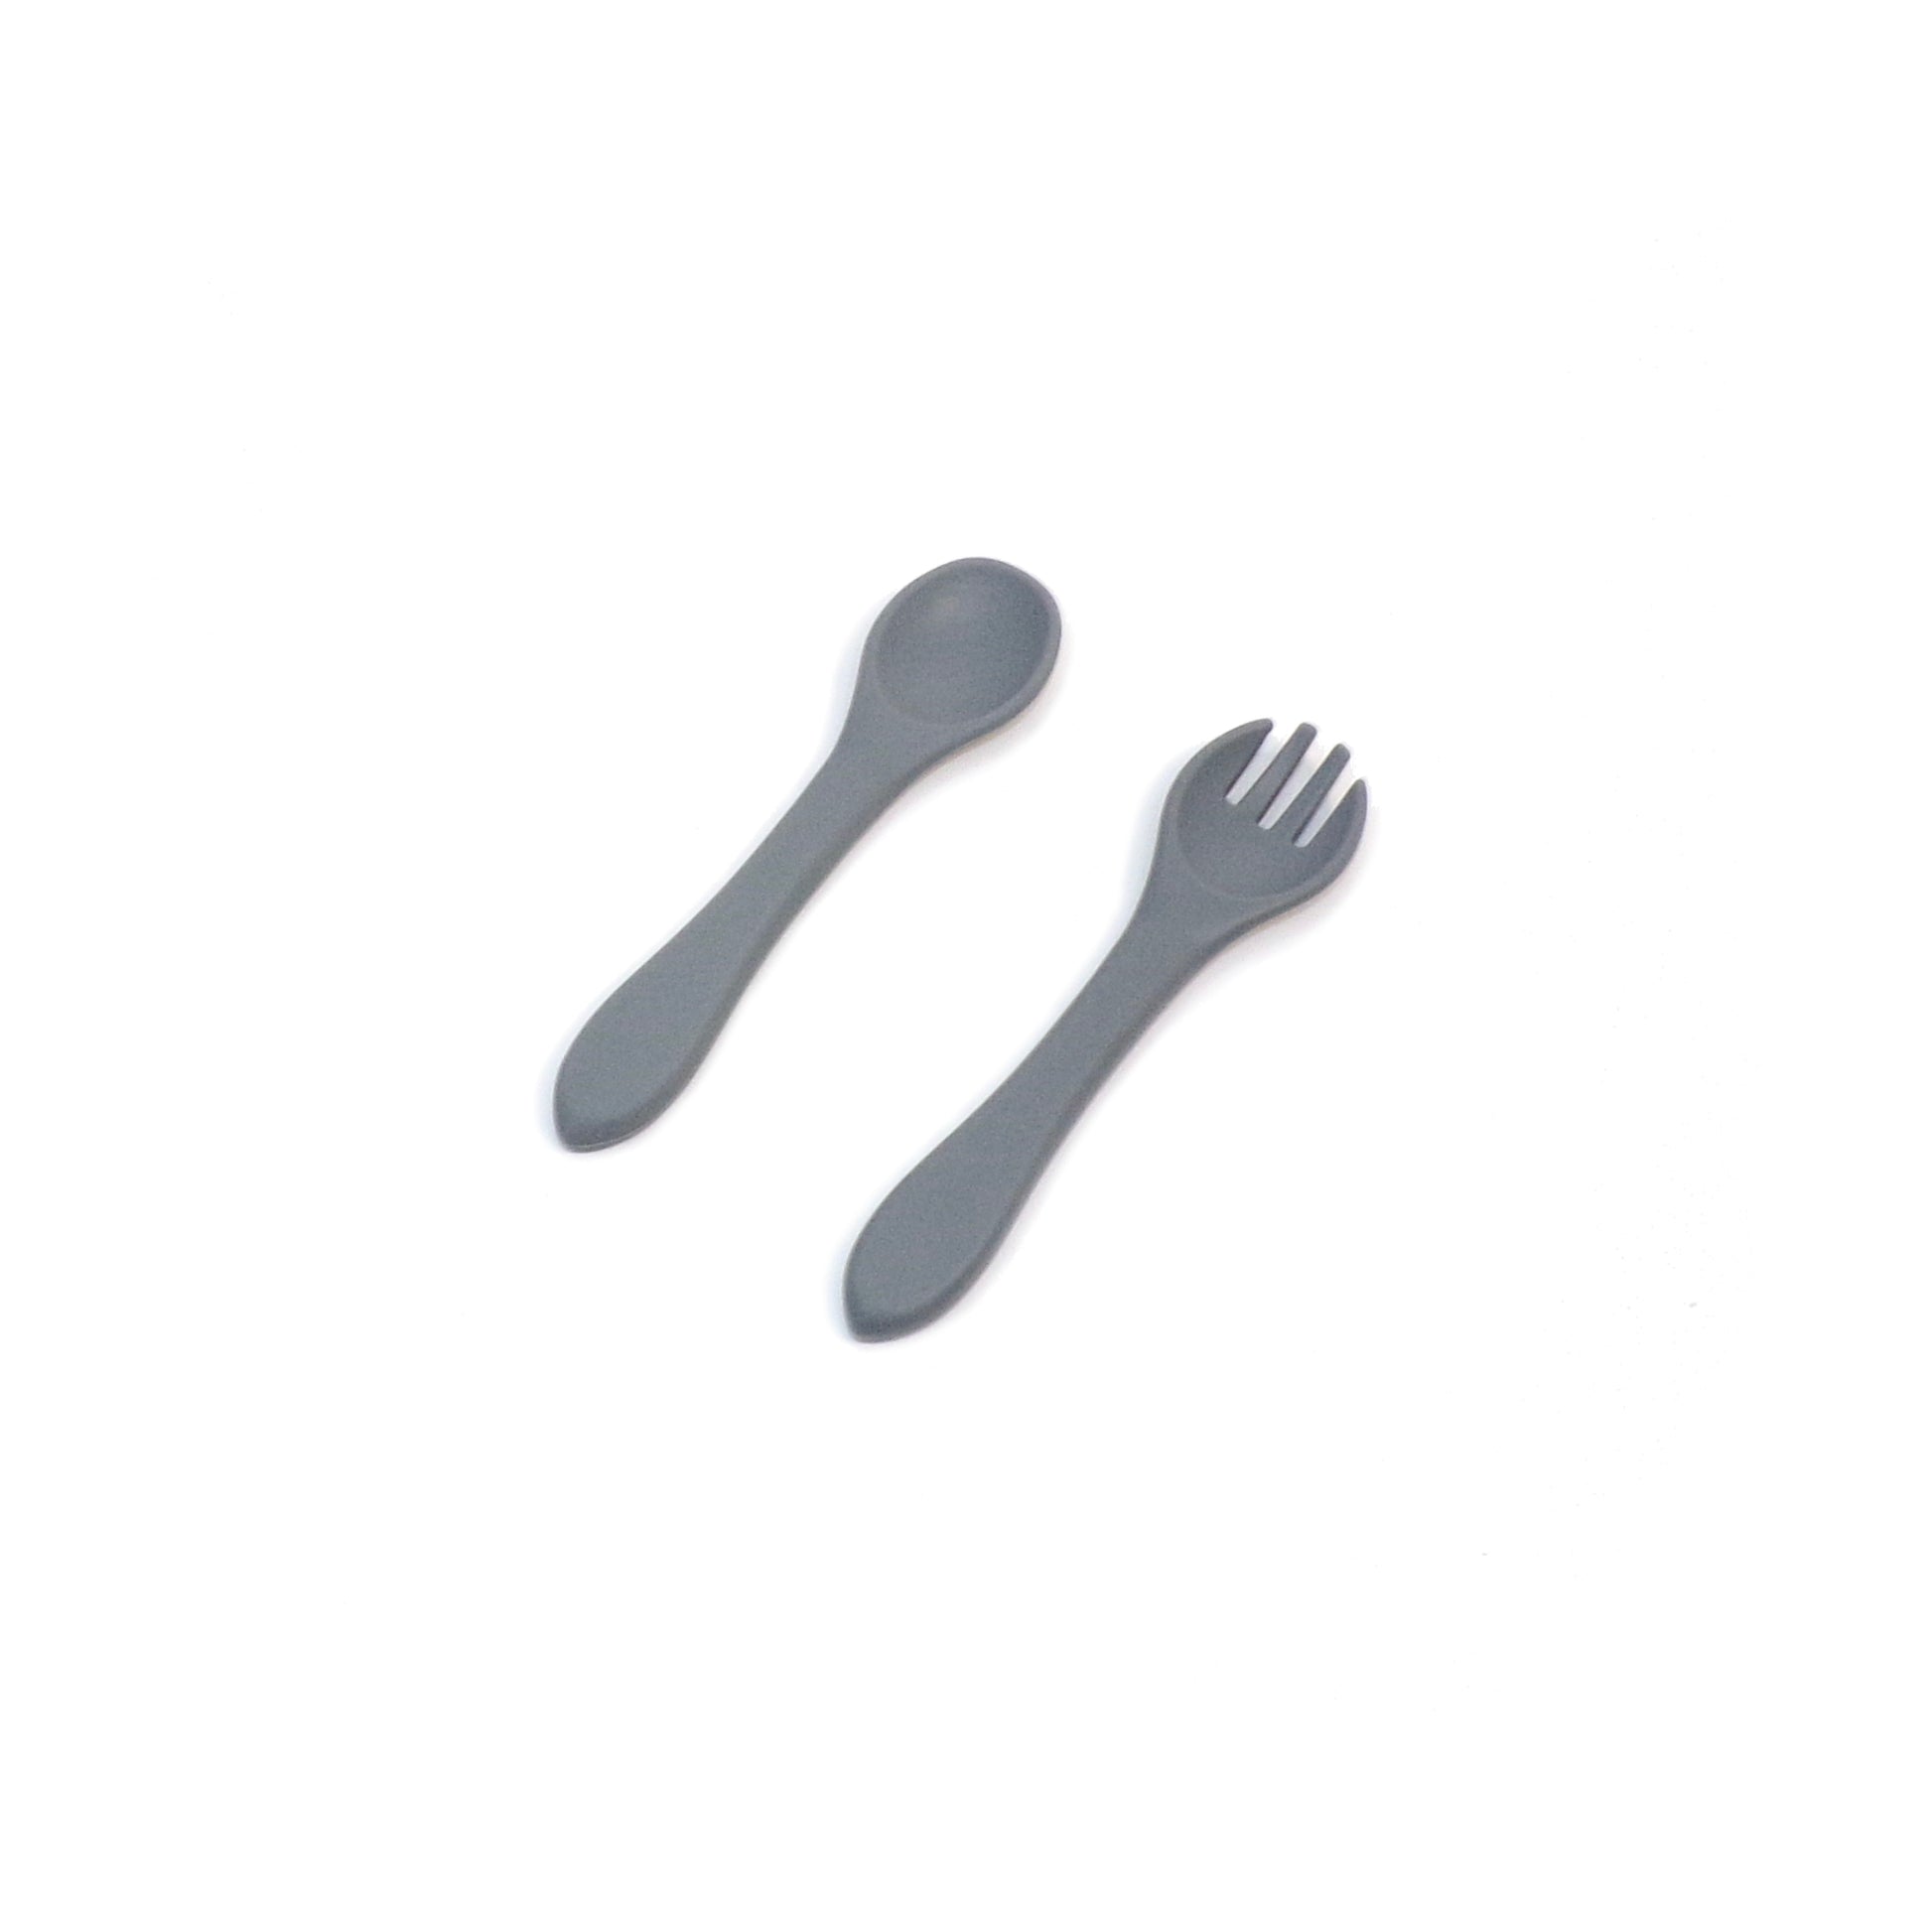 A set of blue silicone cutlery, a fork and spoon. The utensils are designed for young children.